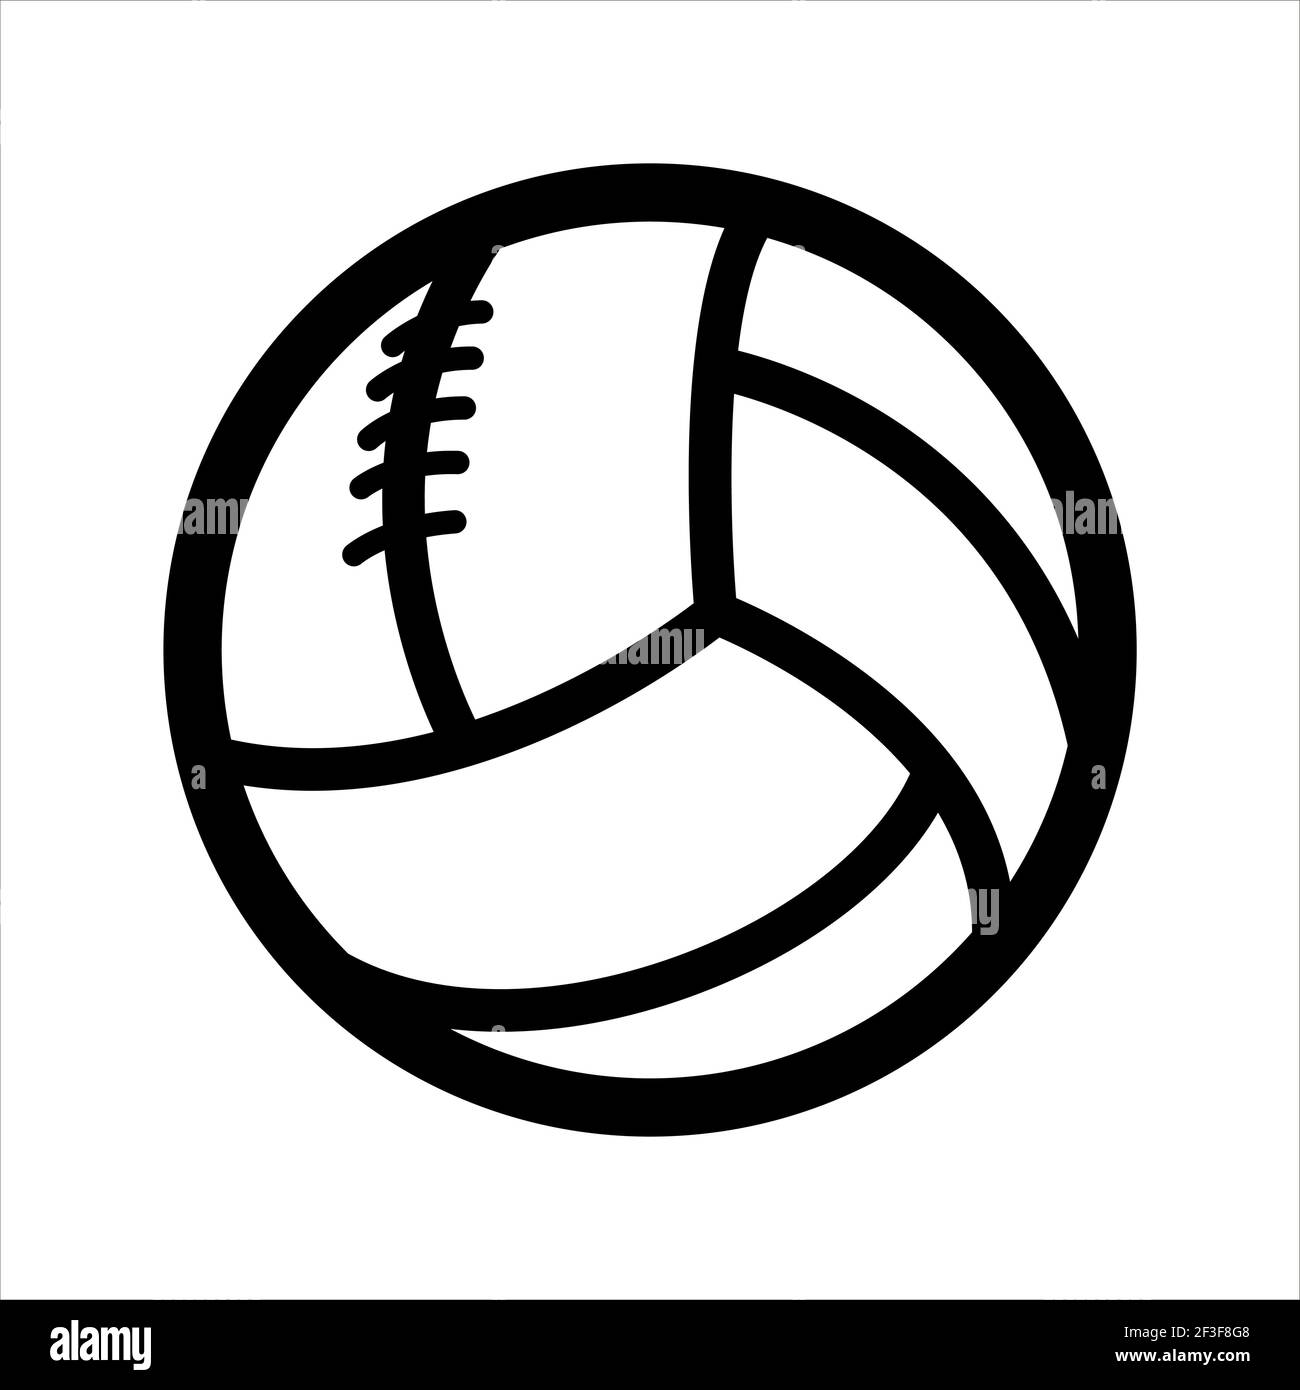 Linear icon of old leather soccer ball. Vector illustration Stock Vector